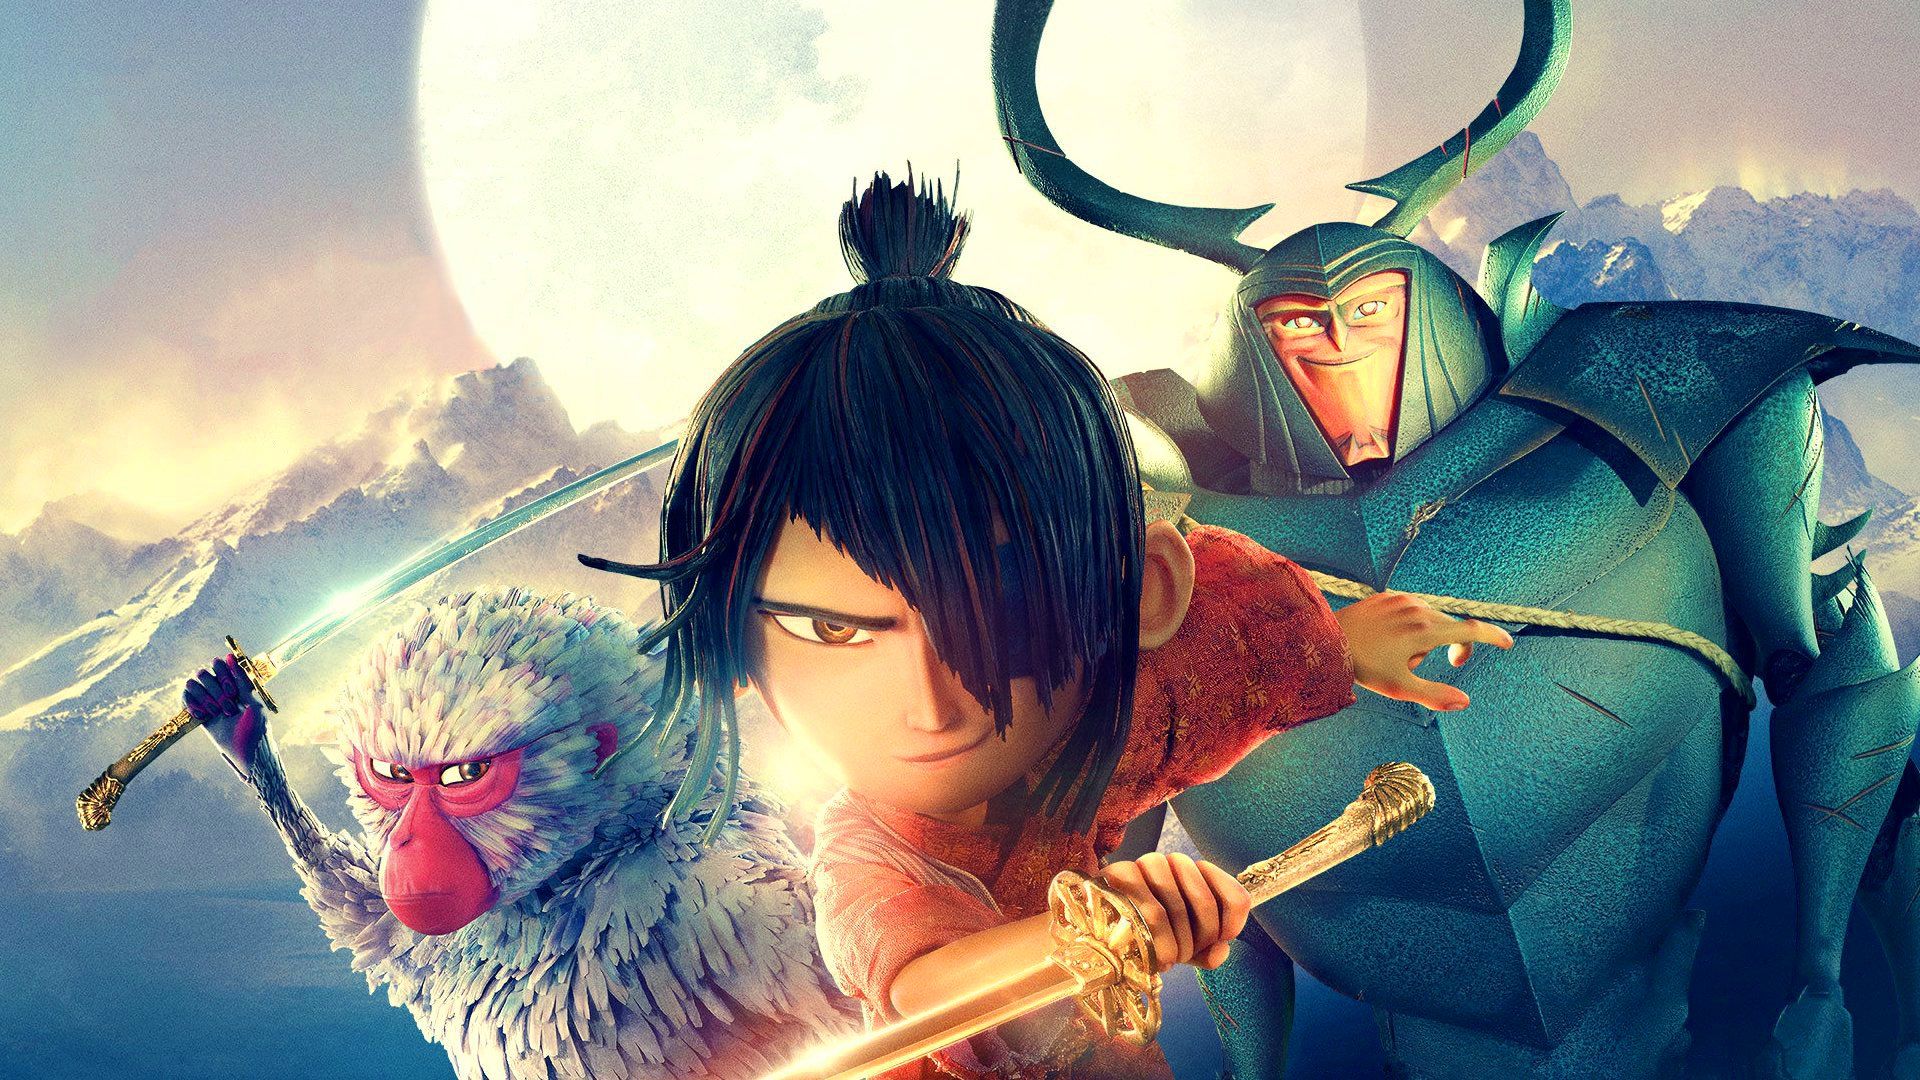 Kubo and the Two Strings background